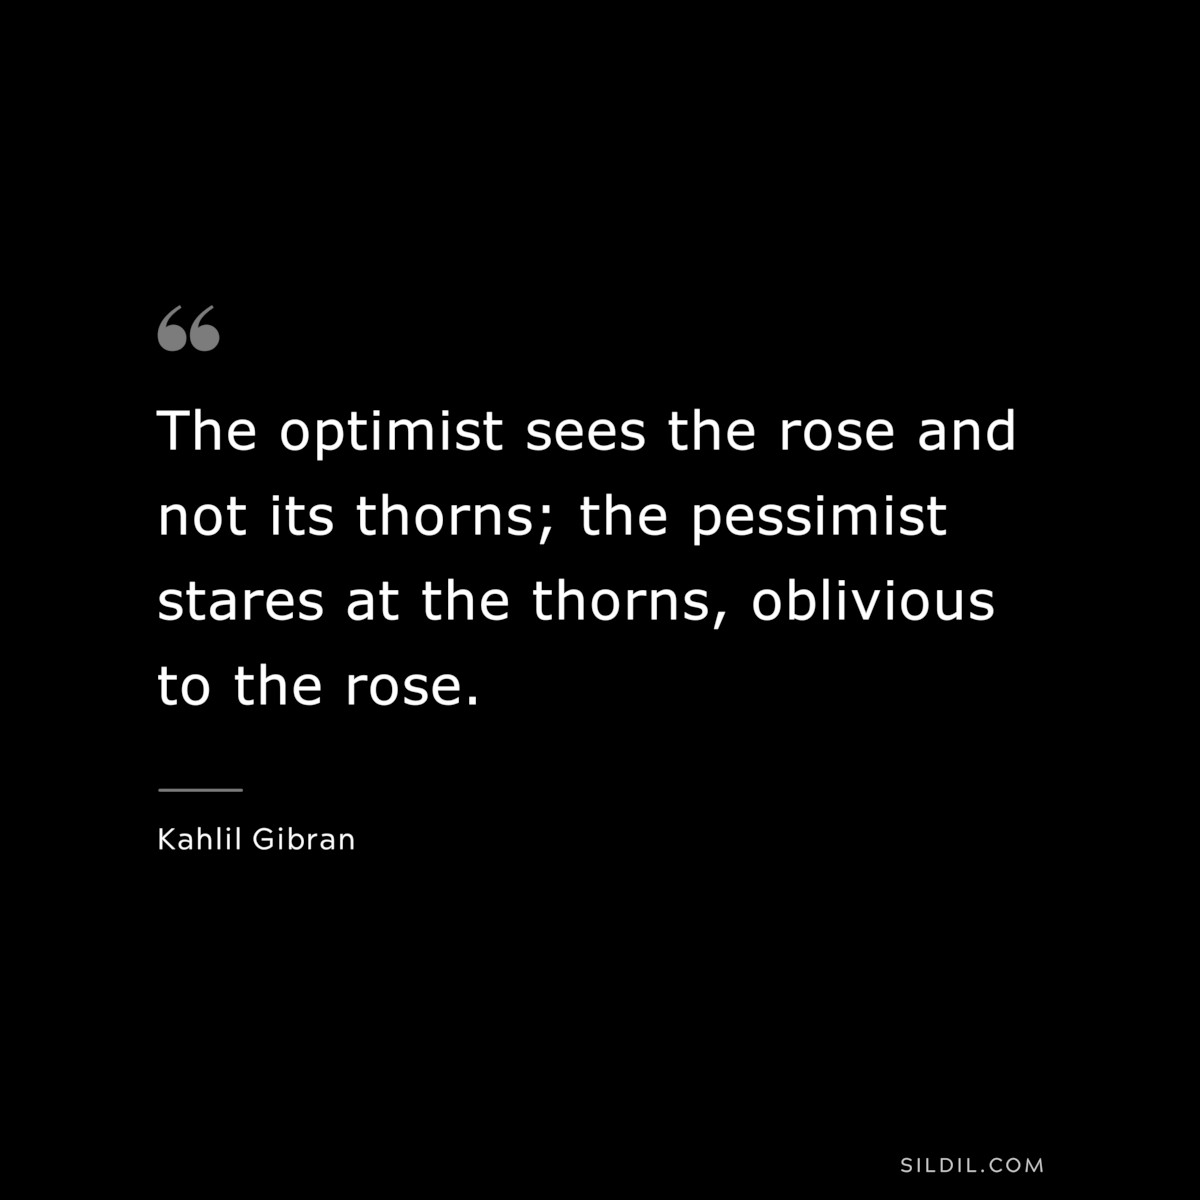 The optimist sees the rose and not its thorns; the pessimist stares at the thorns, oblivious to the rose. ― Kahlil Gibran